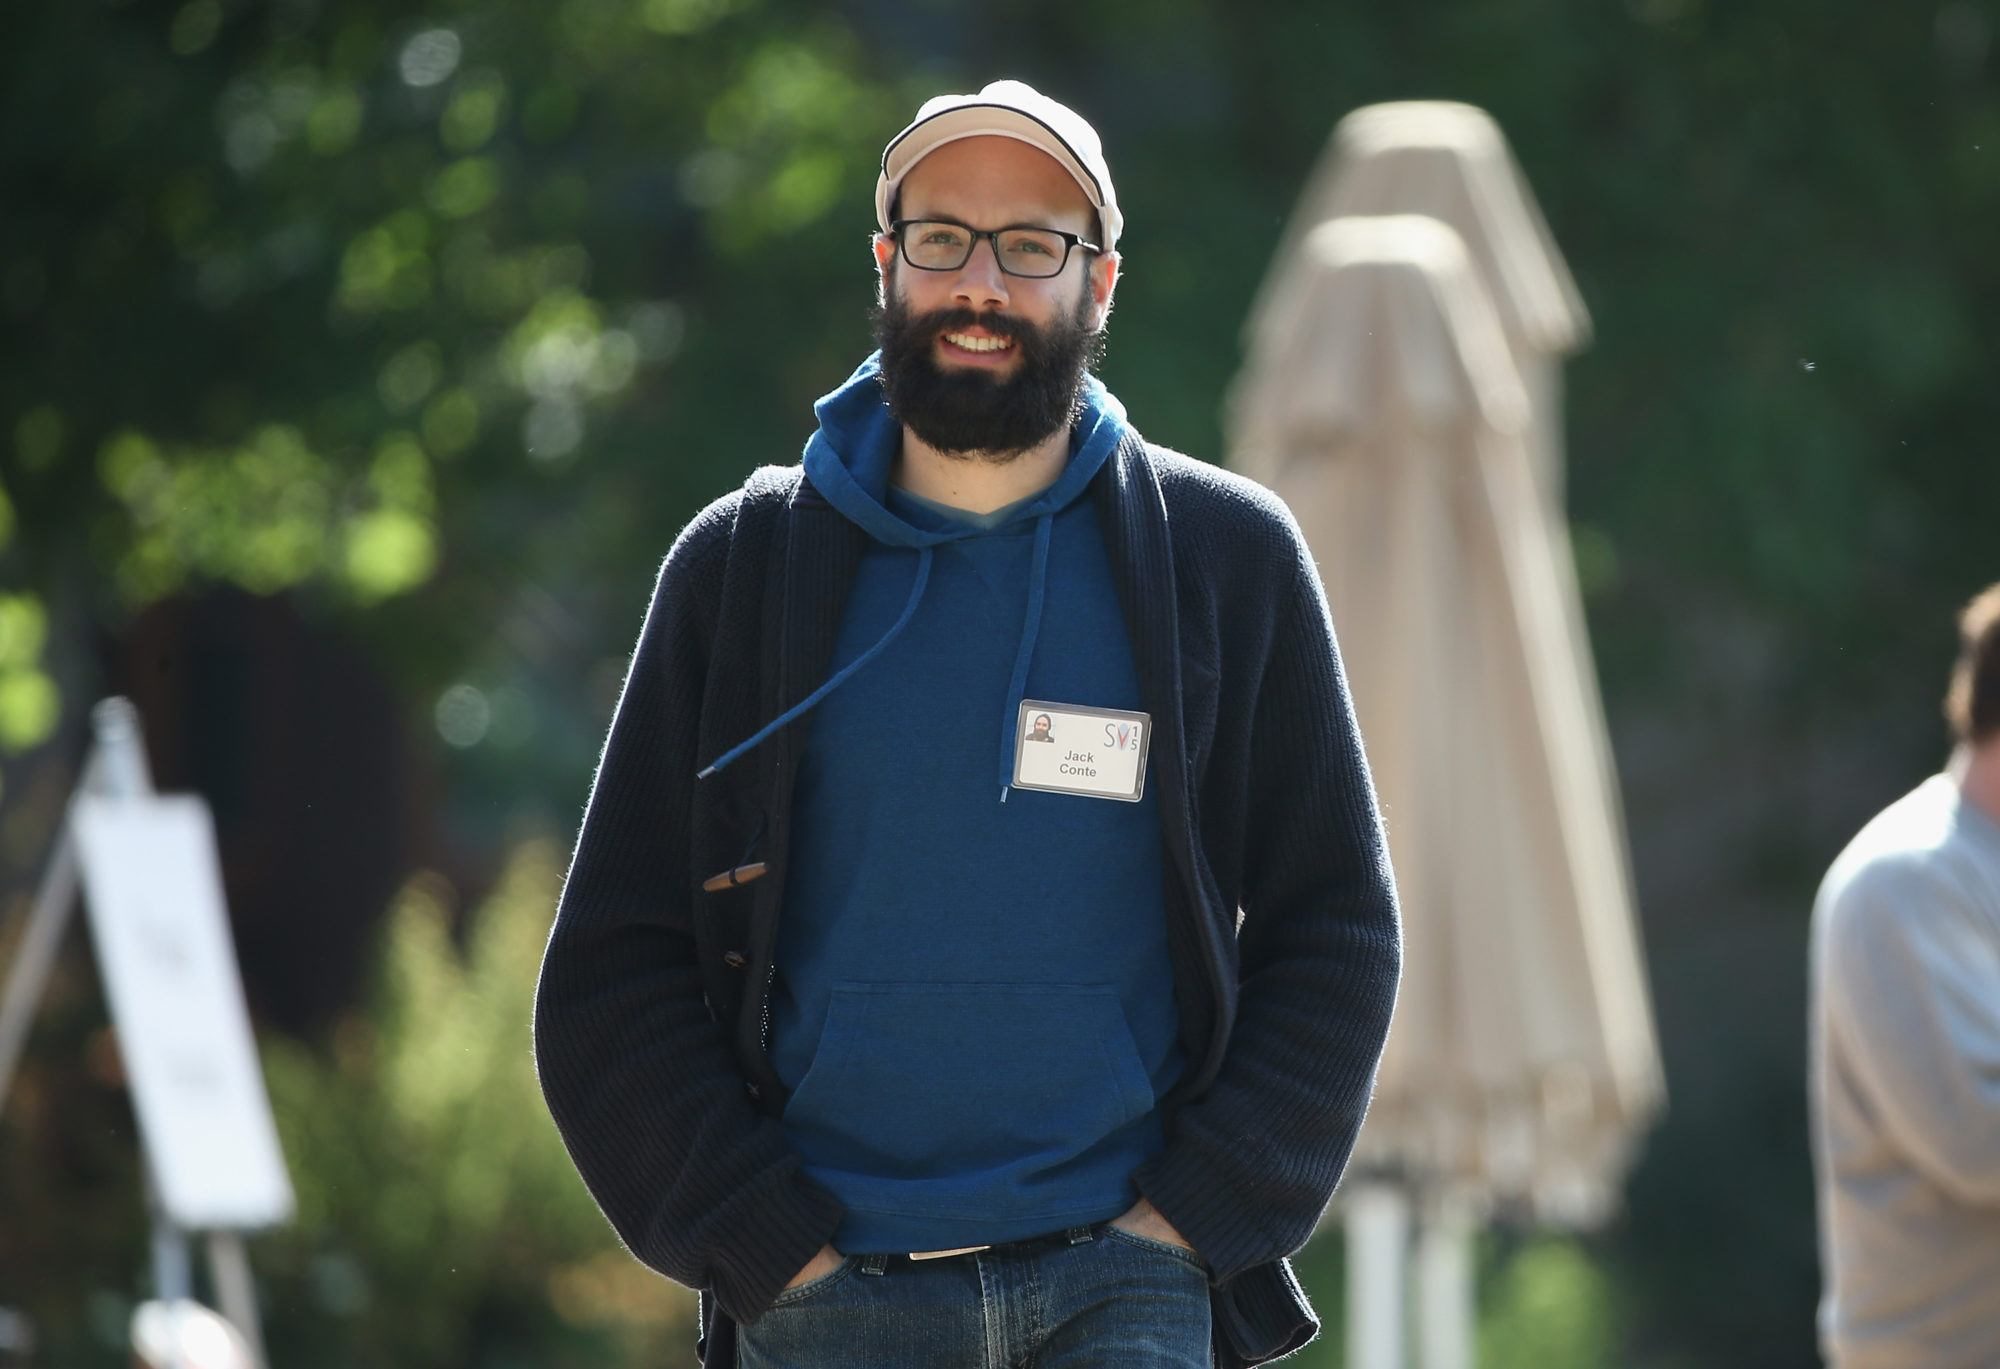 Jack Conte founder of Patreon